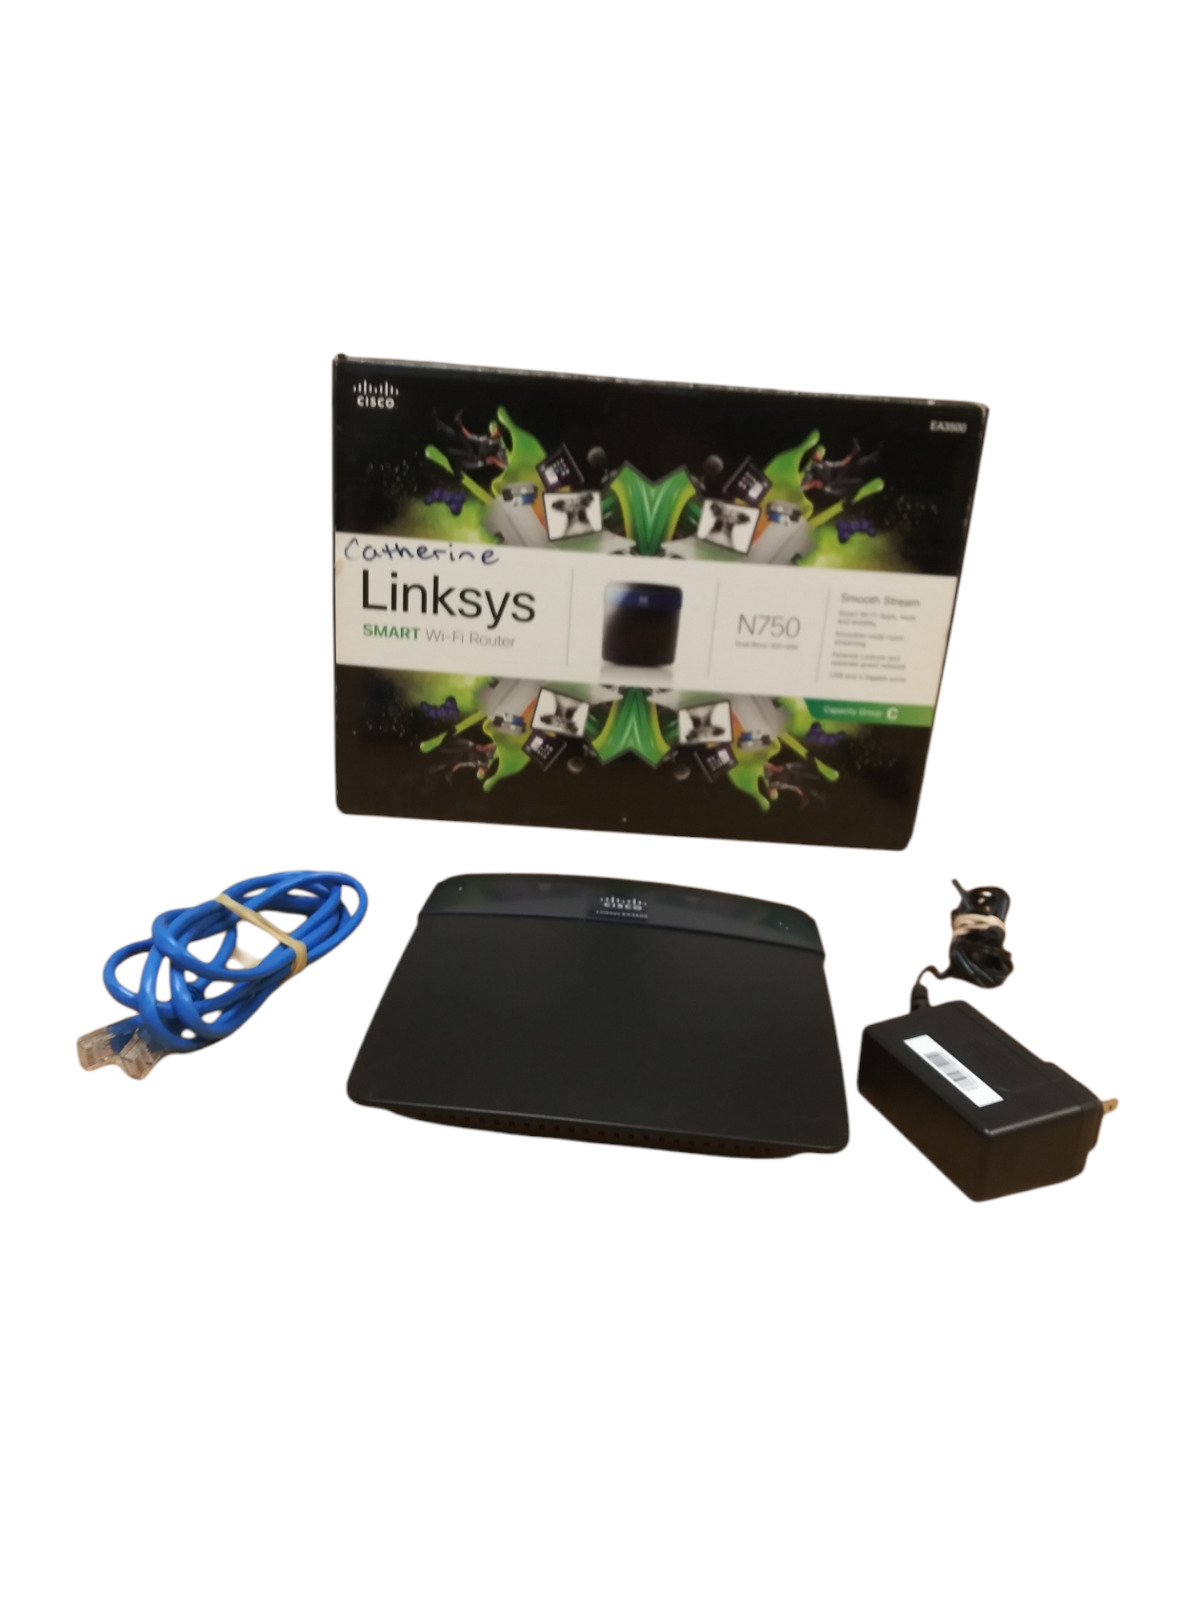 Linksys N750 EA3500 Dual-Band Smart Wi-Fi Router Gigabit and USB